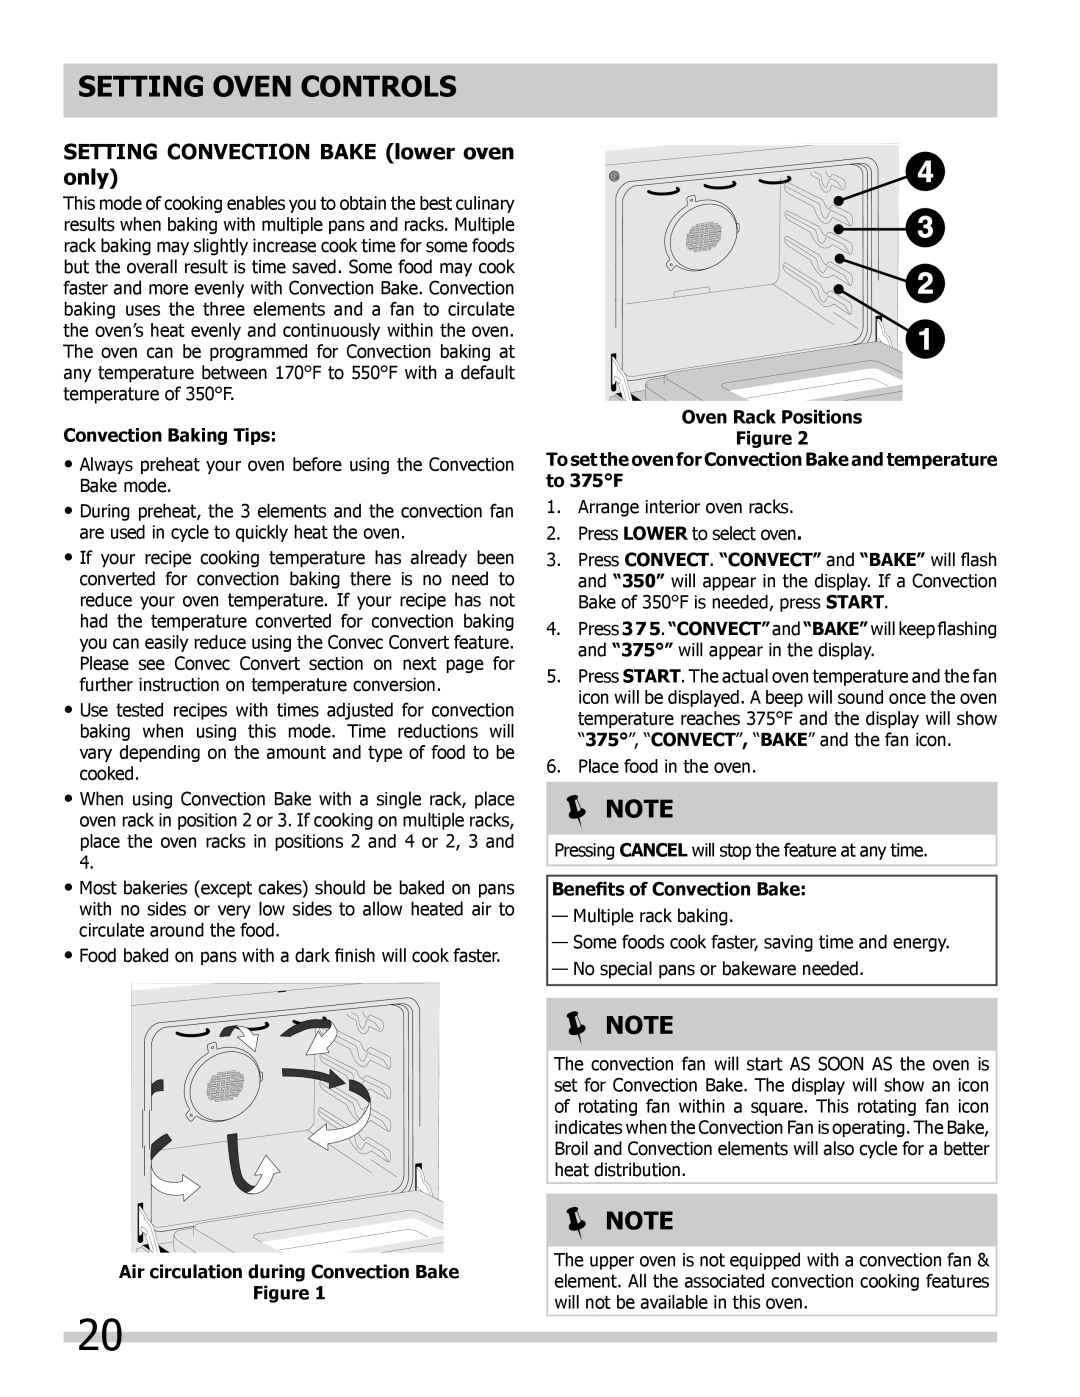 Frigidaire 318205205 manual Setting Oven Controls, Setting Convection Bake lower oven only, Convection Baking Tips,  Note 